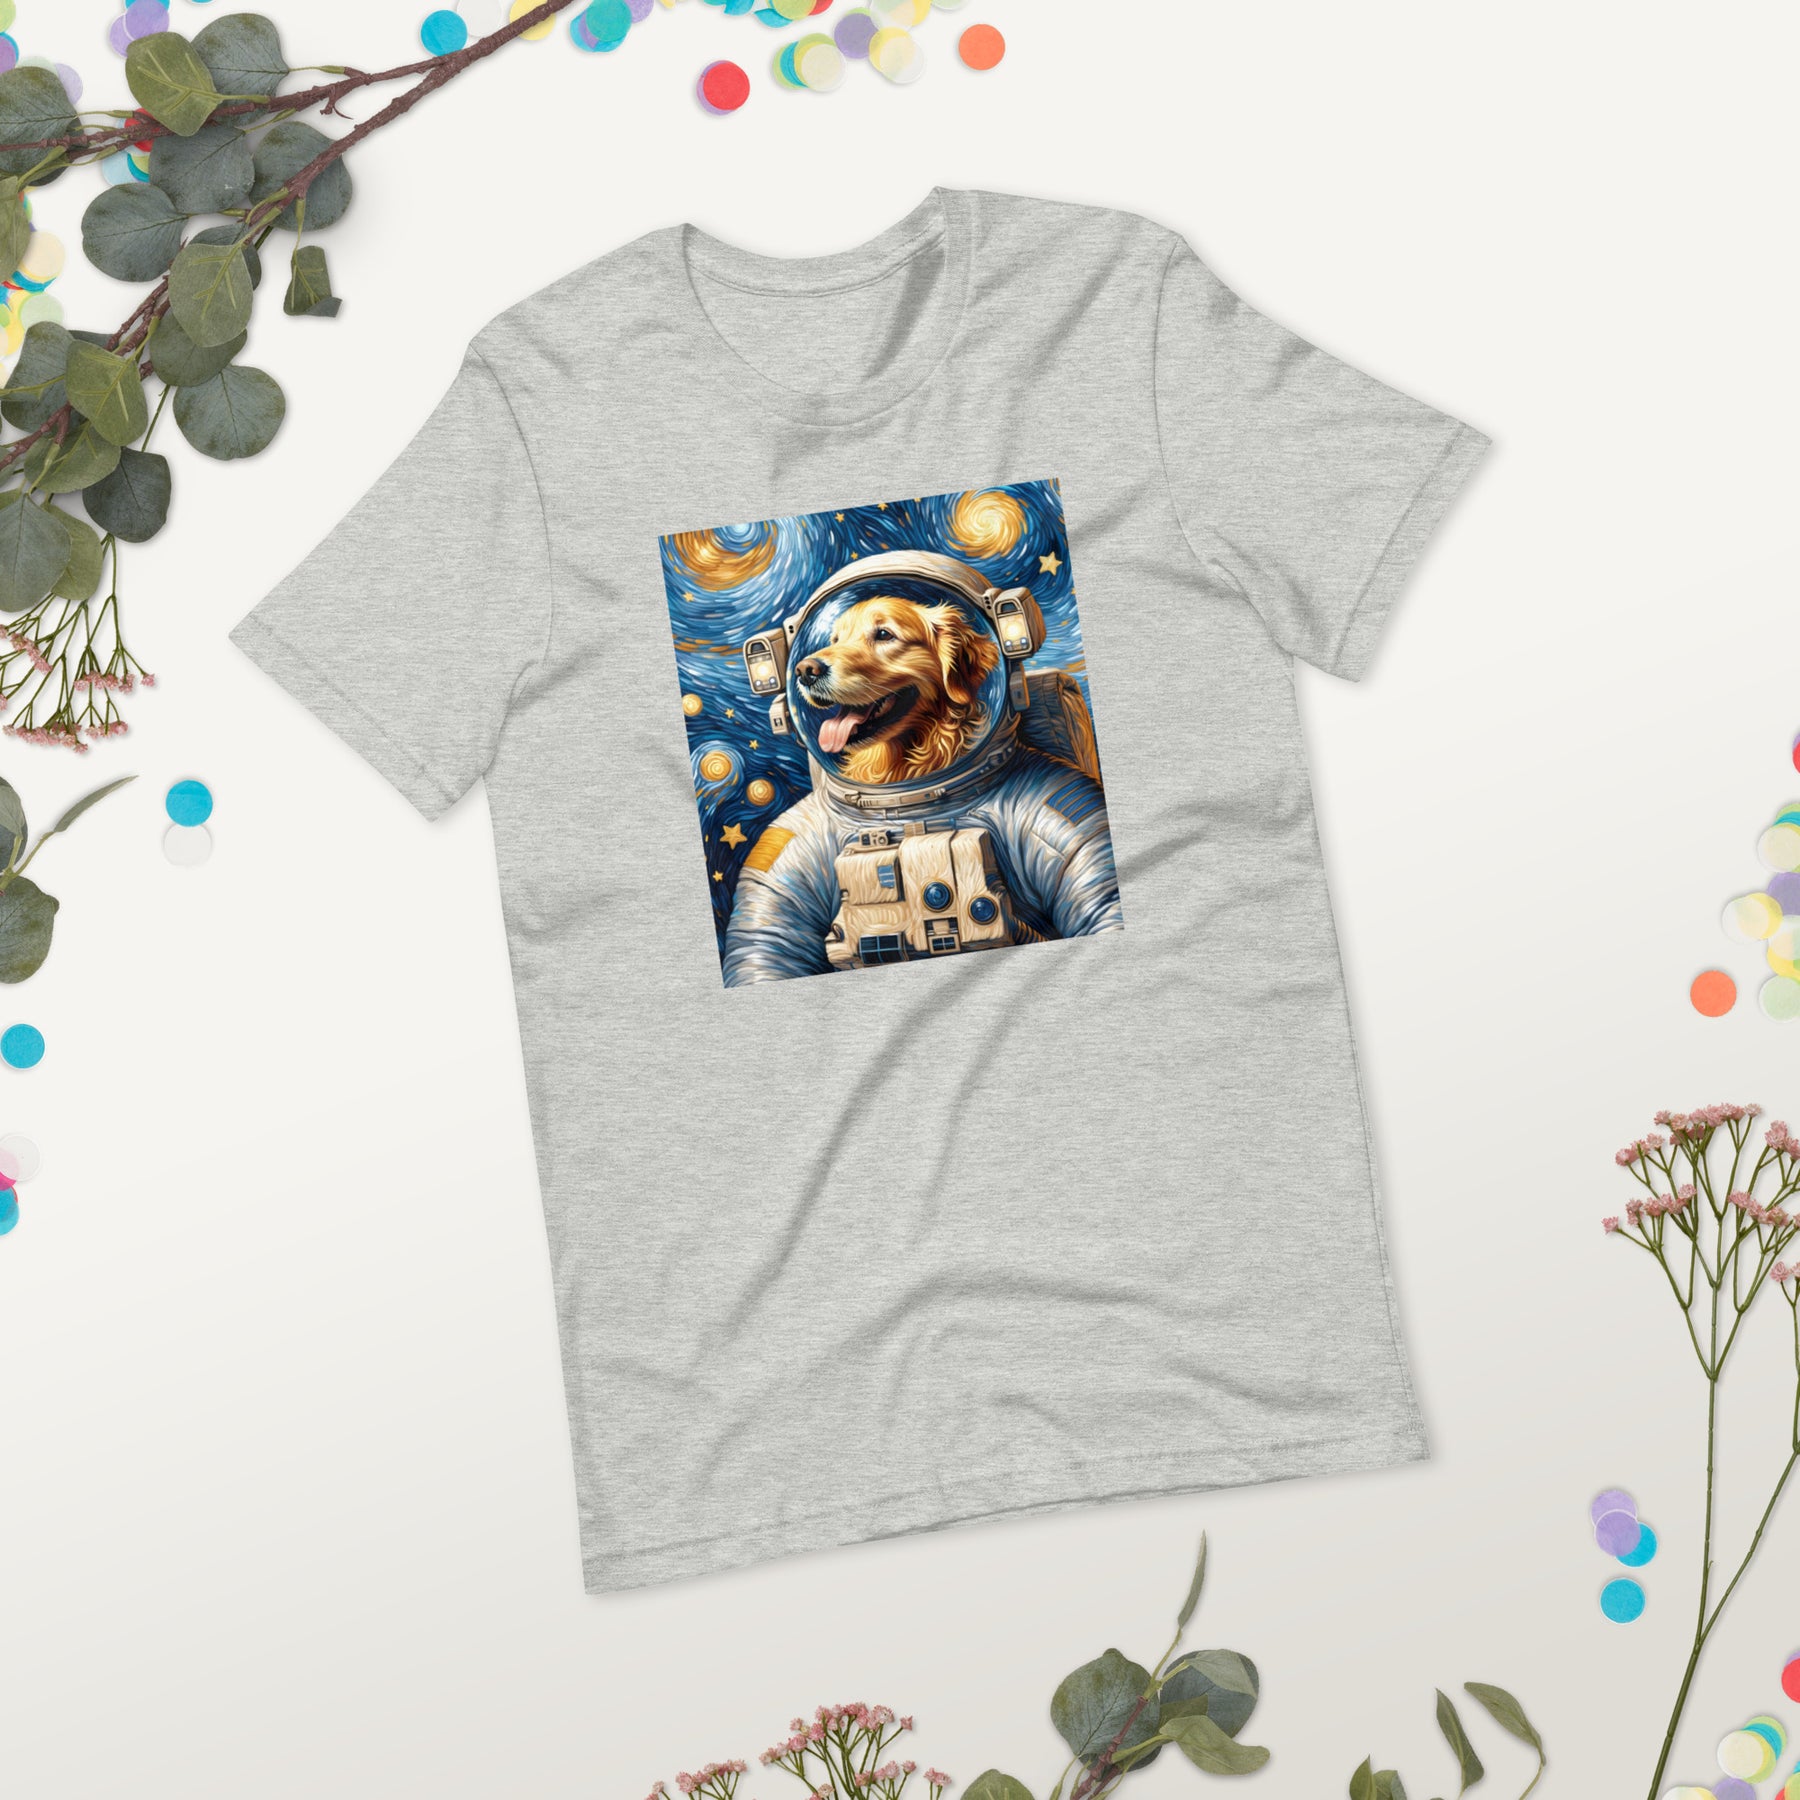 Space Dog Astronaut Shirt, Funny Outer Space Tee for Golden Retriever Lovers, Cosmic Dog T-Shirt, Astronomy Enthusiasts, Galaxy-Themed Gift